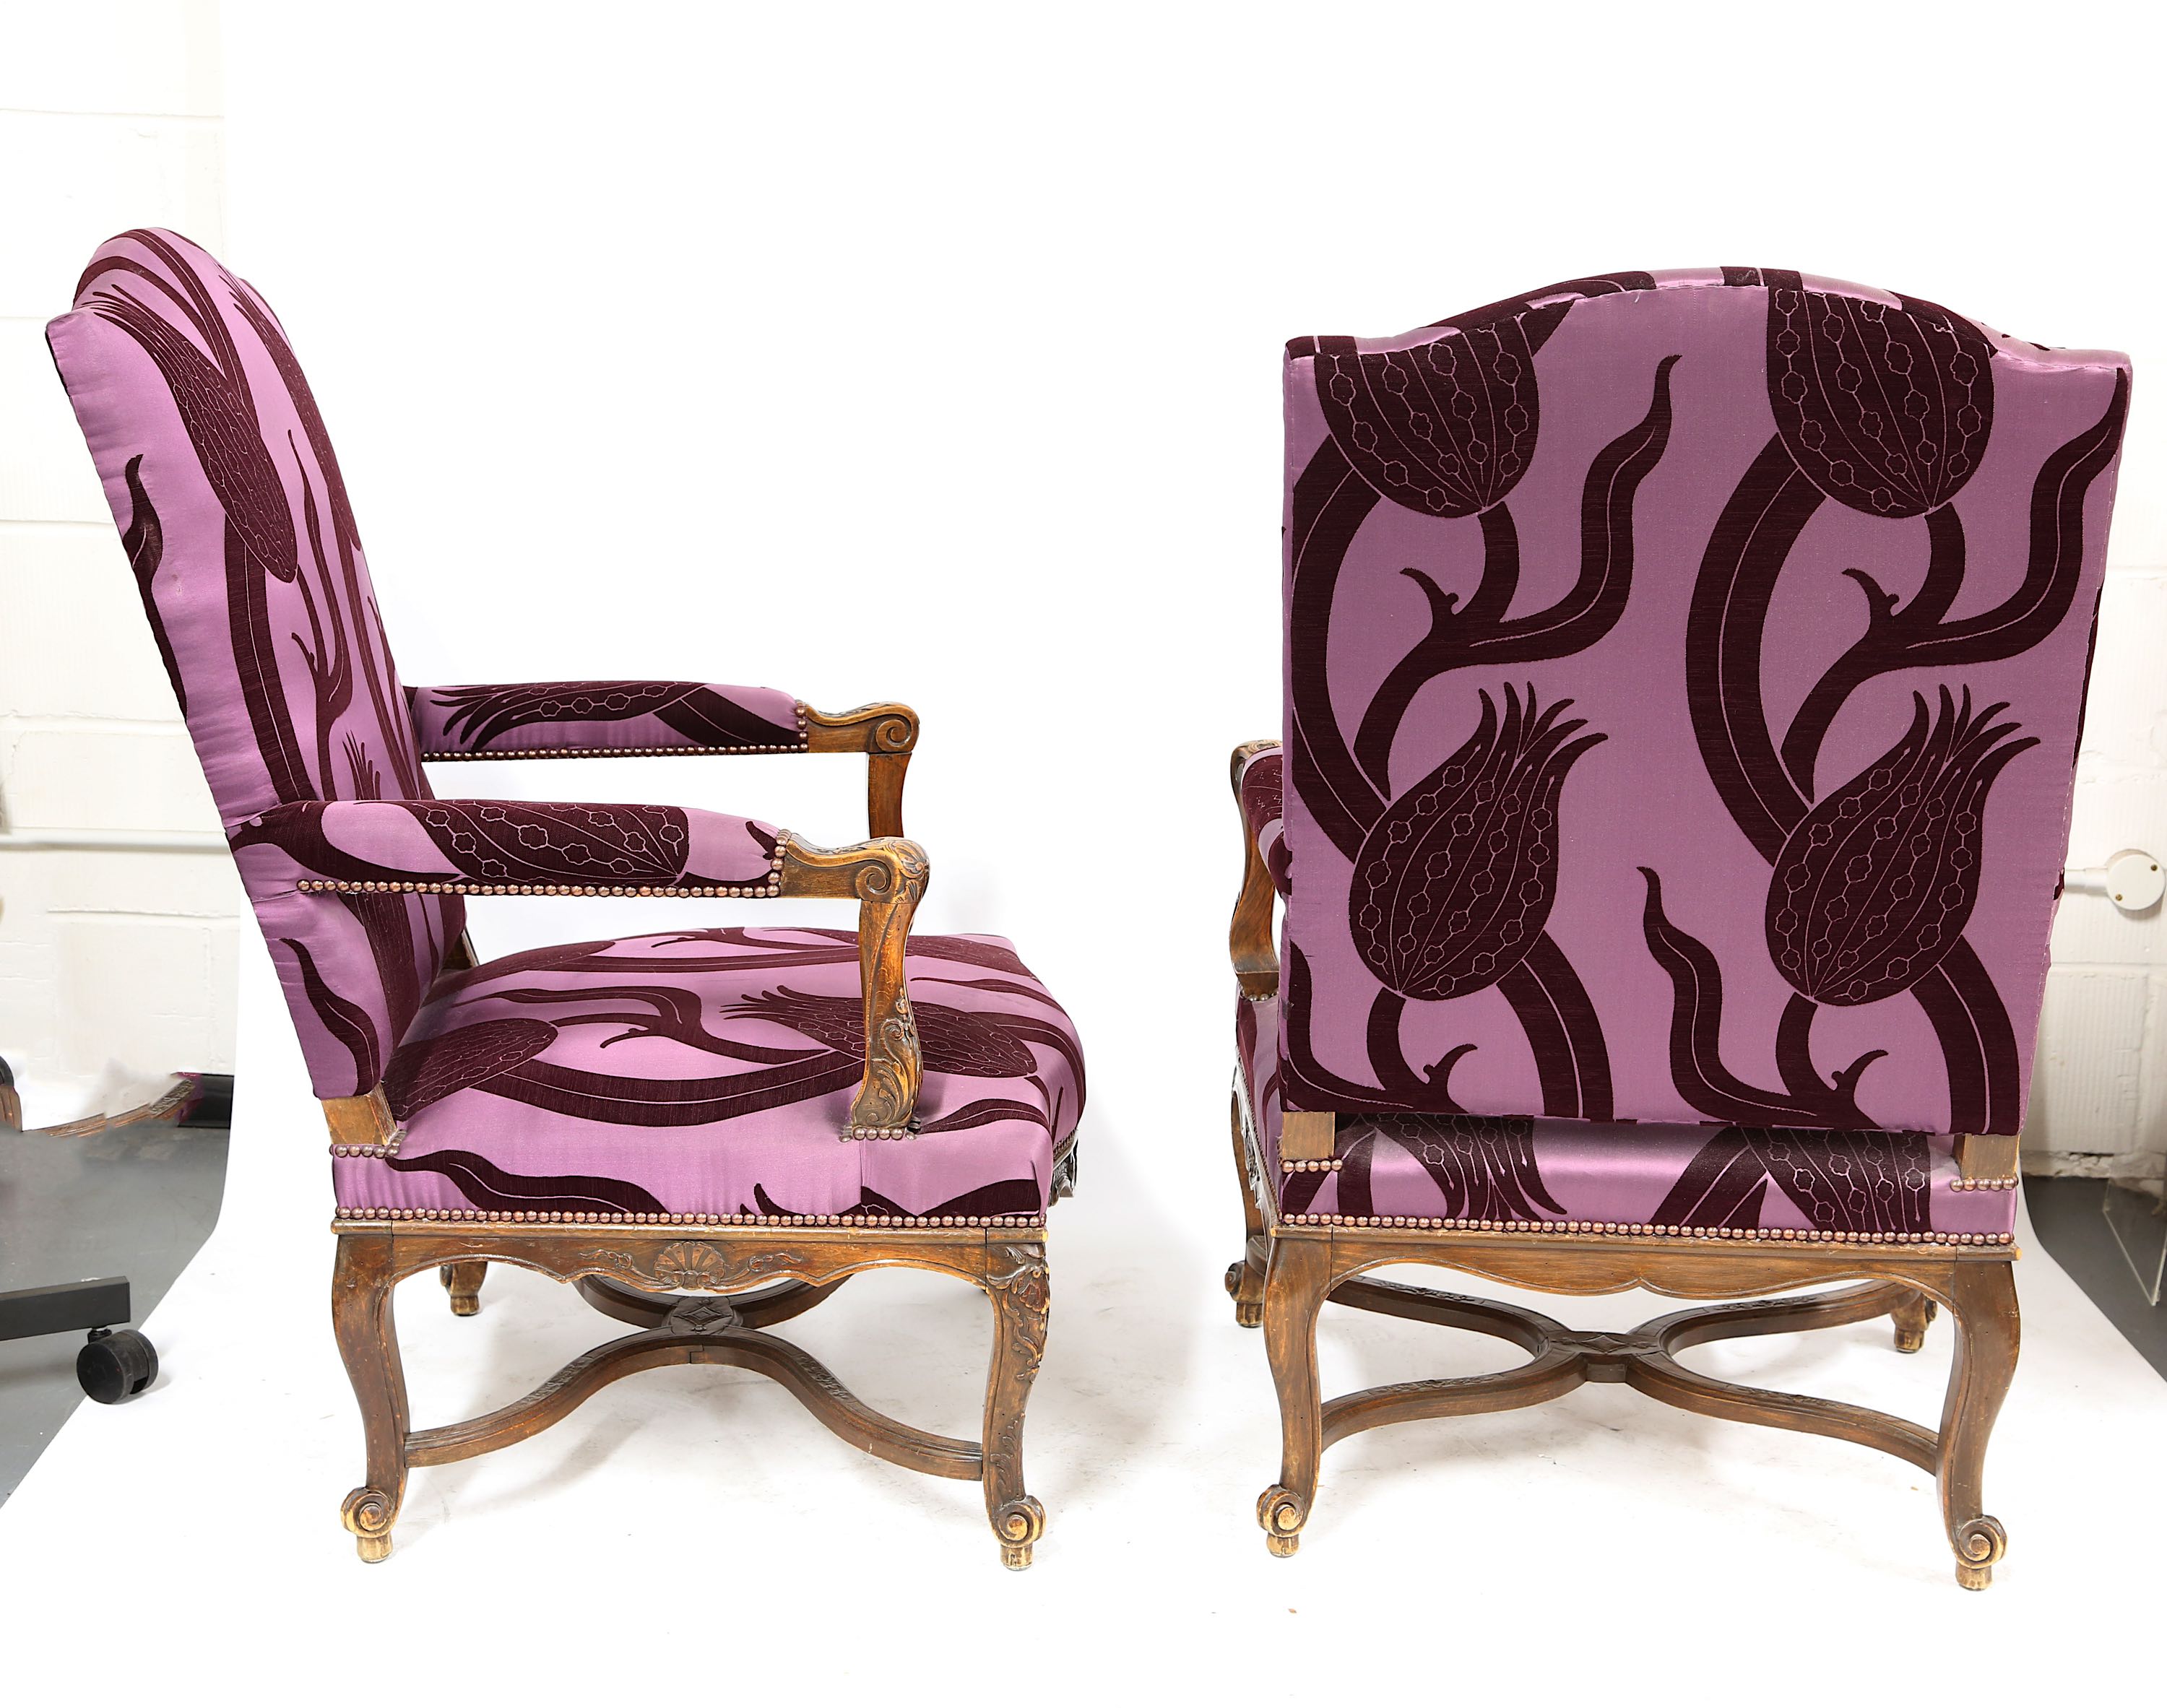 A PAIR OF LATE 19TH CENTURY FRENCH WALNUT ARMCHAIR - Image 9 of 9